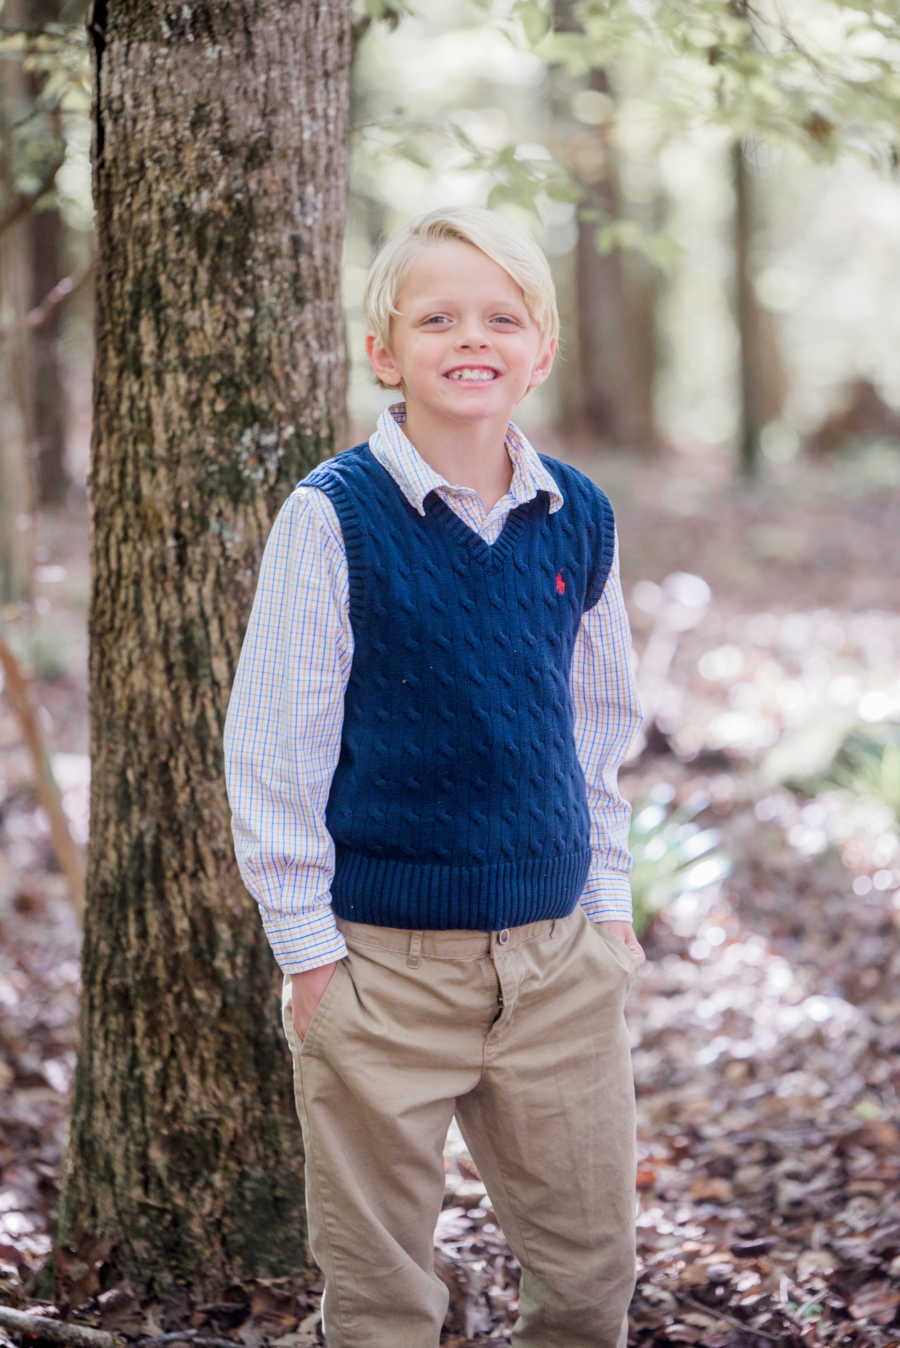 Young boy who told his mom he's "bad" stands in khakis, button down, and sweater vest beside tree